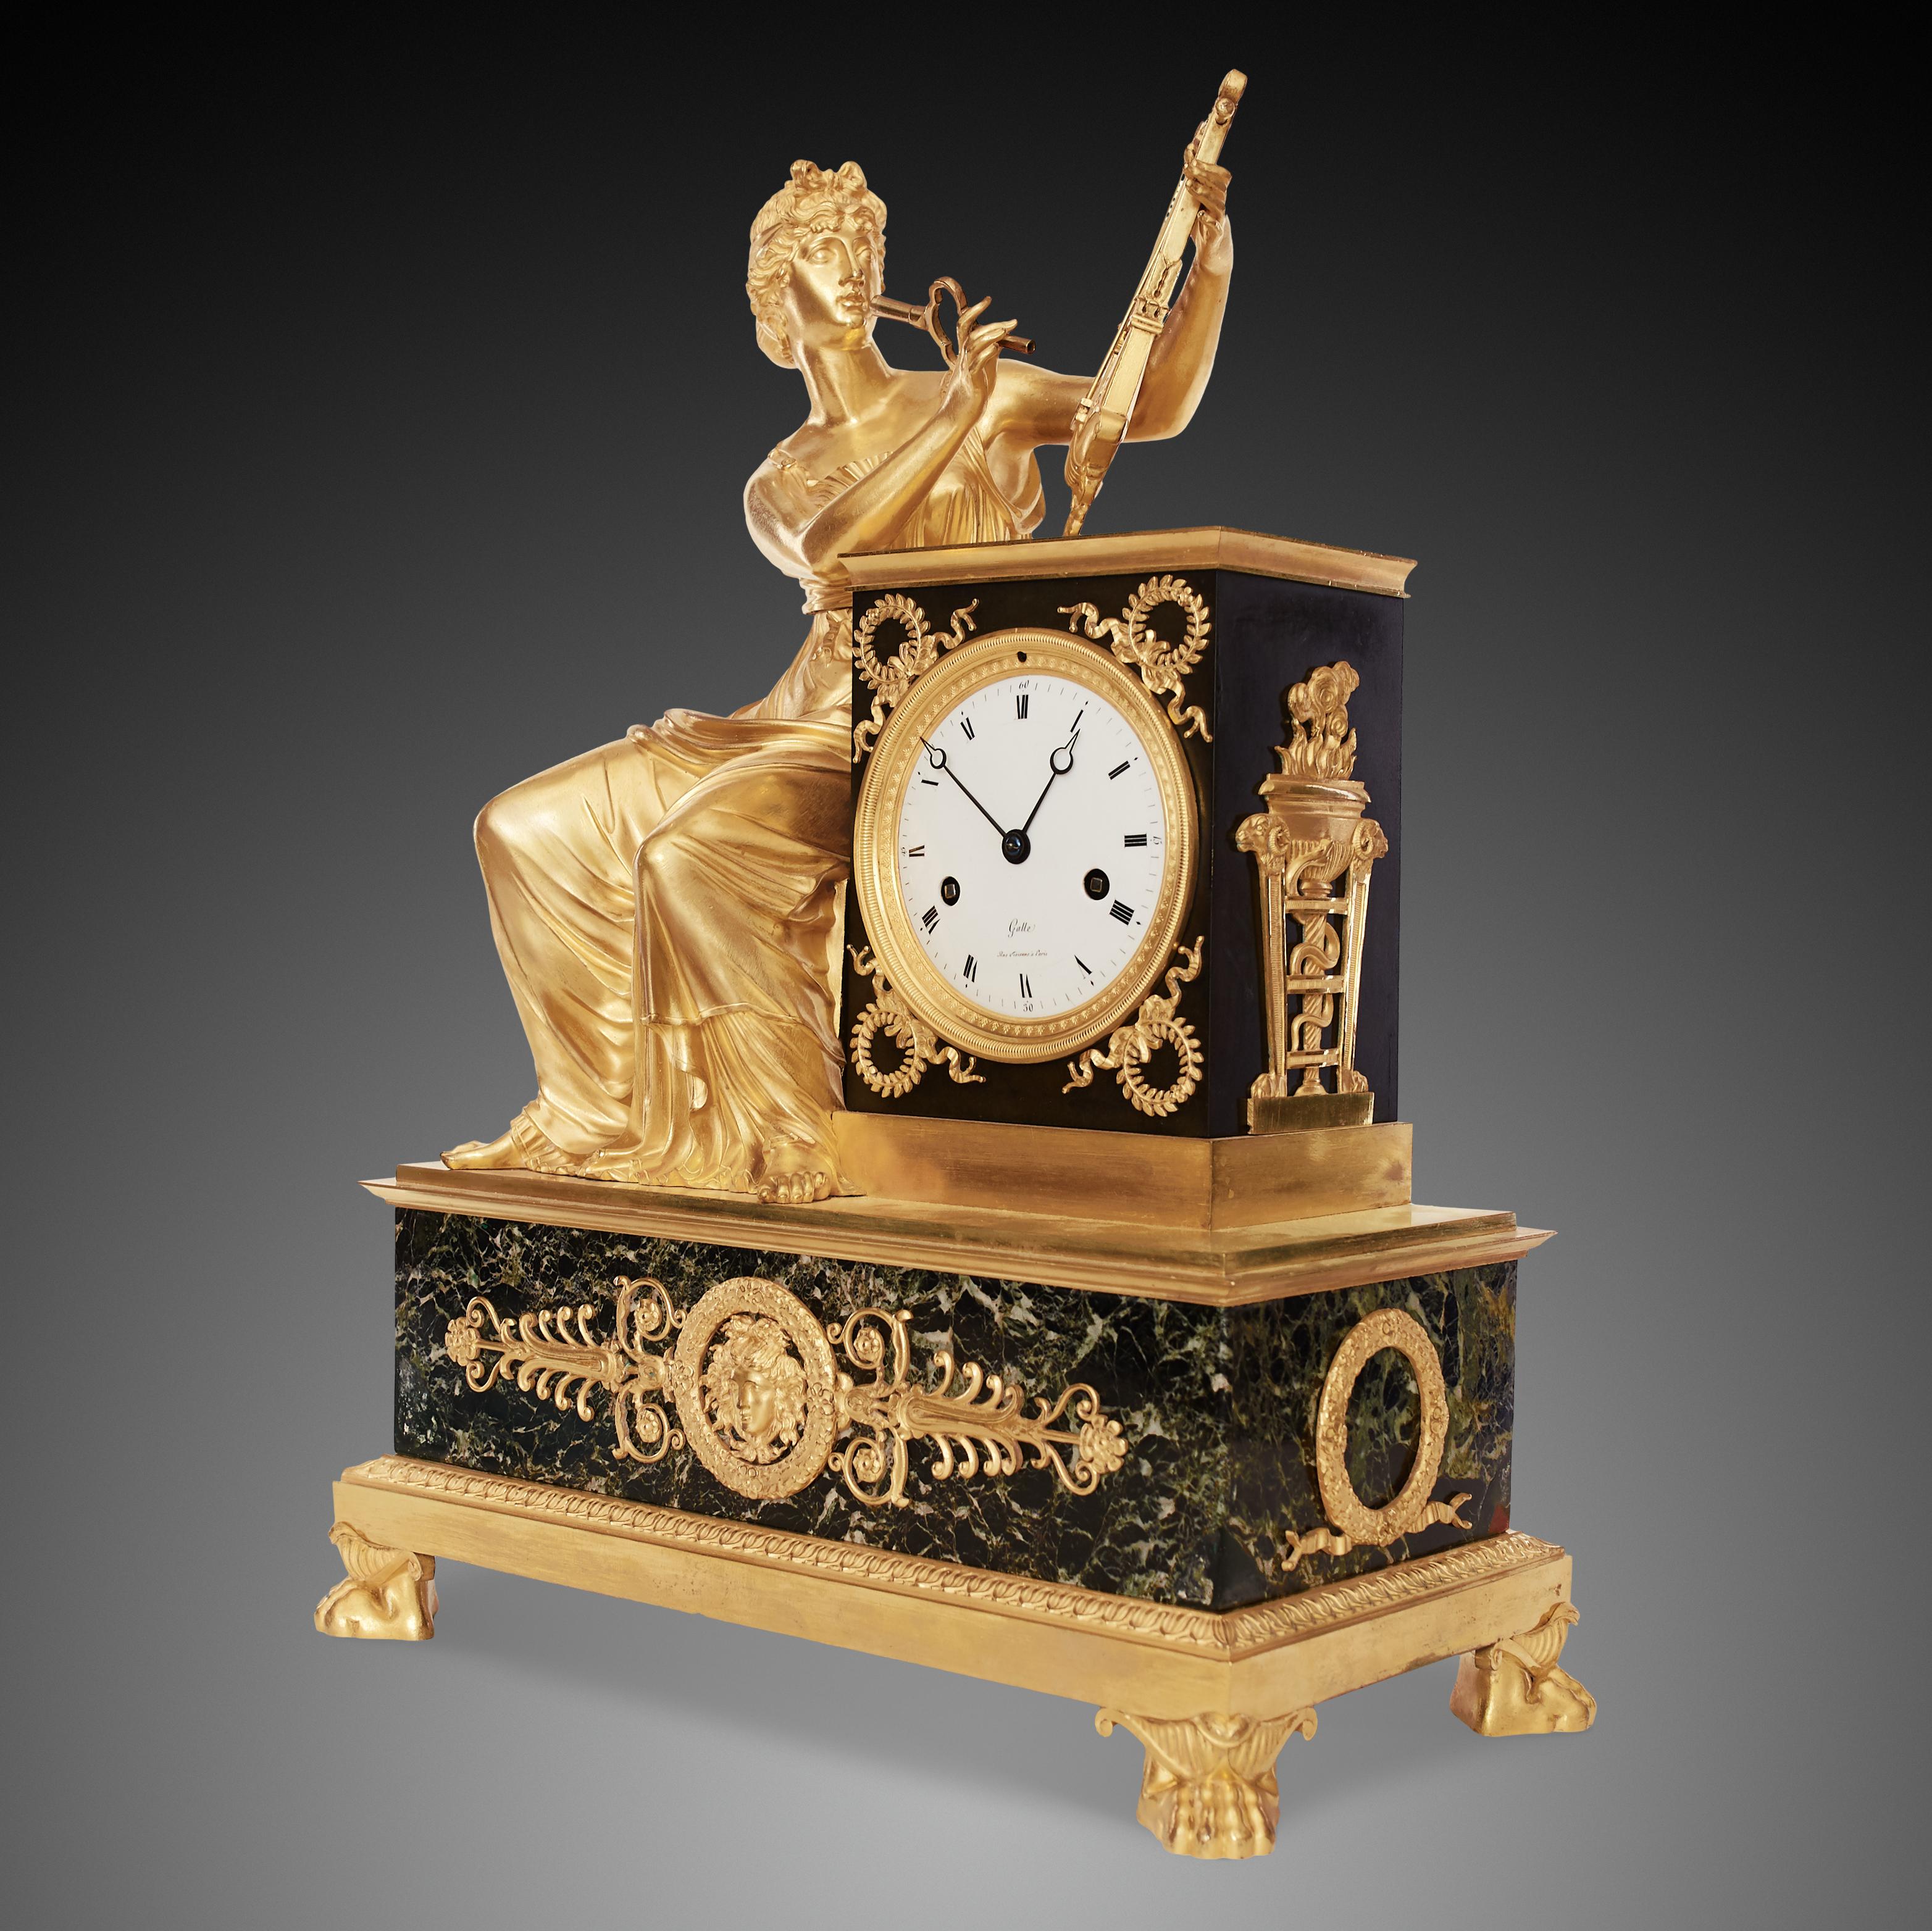 This is a beautiful antique French Empire mantle clock was made of gilded bronze and marble. The clock is placed on a rectangular marble pedestal, with four legs in the shape of a lion's foot. The white enamel dial signed “Galle, Rue Vivienne à